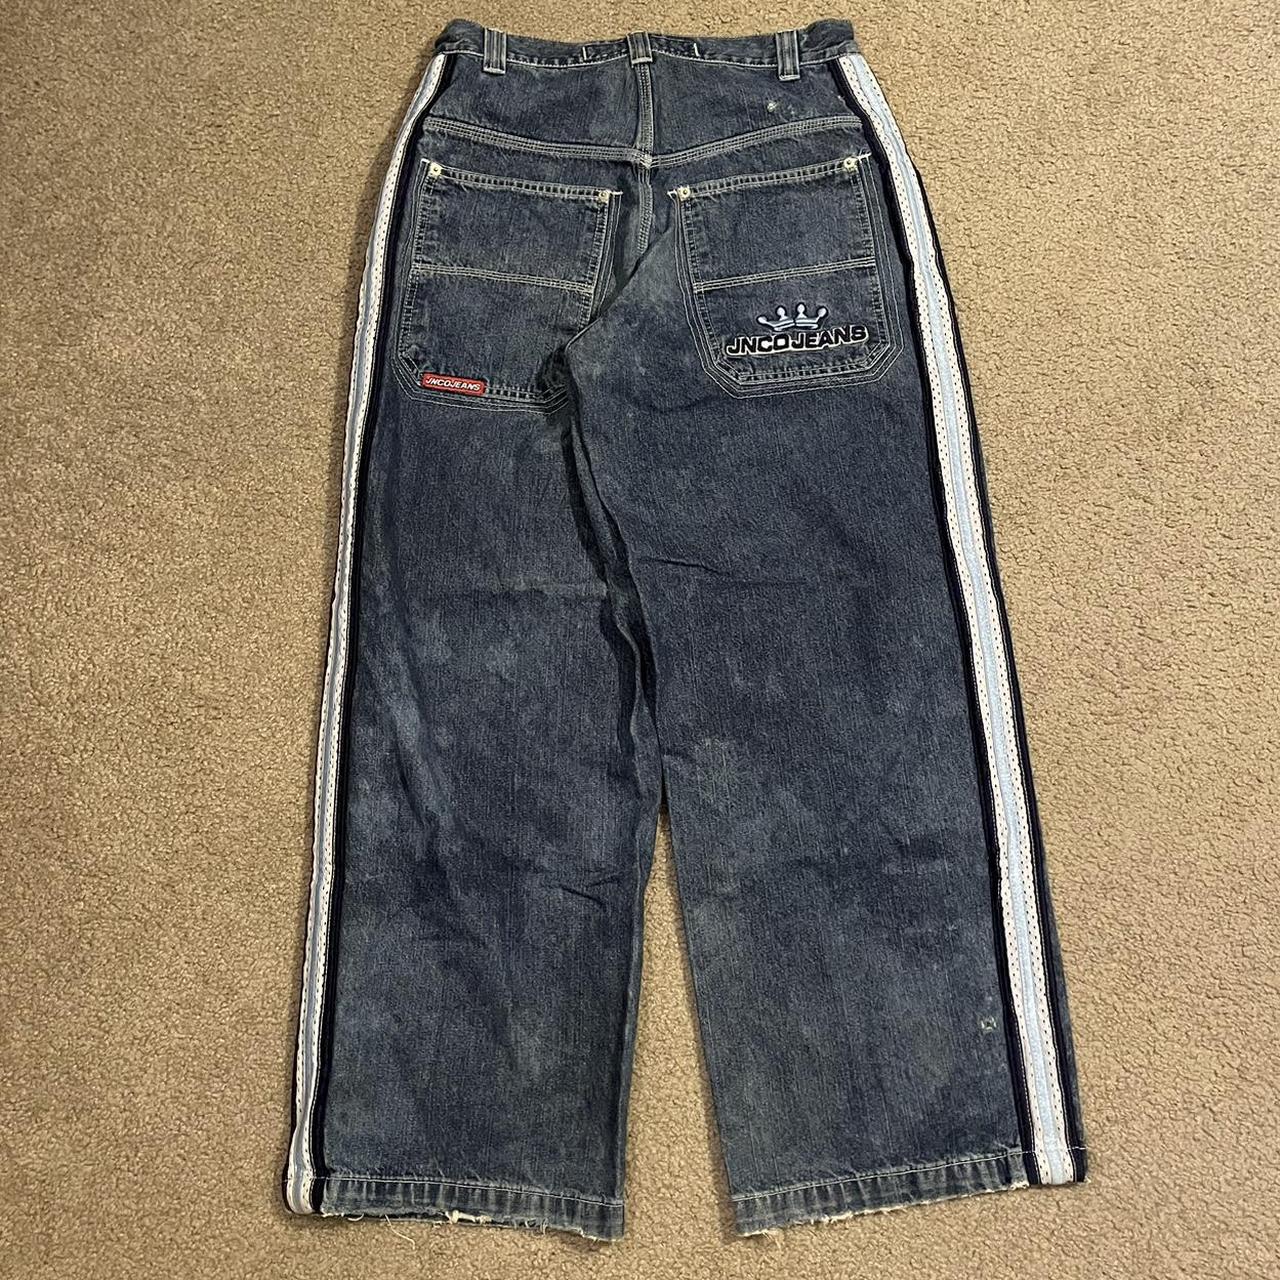 JNCO Men's Blue and White Jeans | Depop